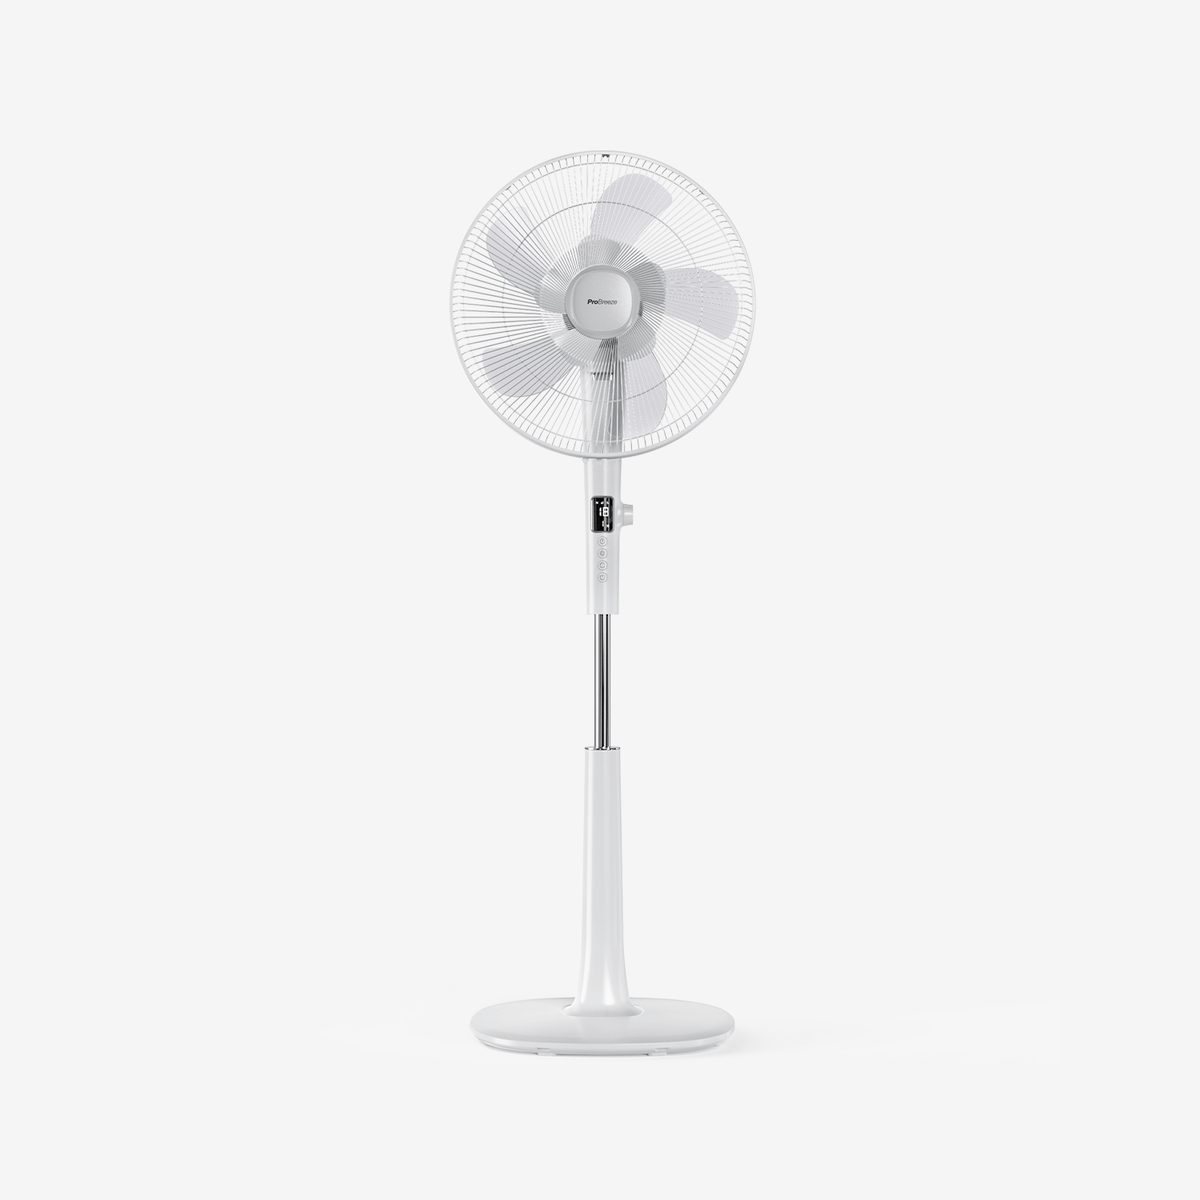 16" Pedestal Fan - Low Energy DC Motor, 3 Operating Modes & Remote Control - White